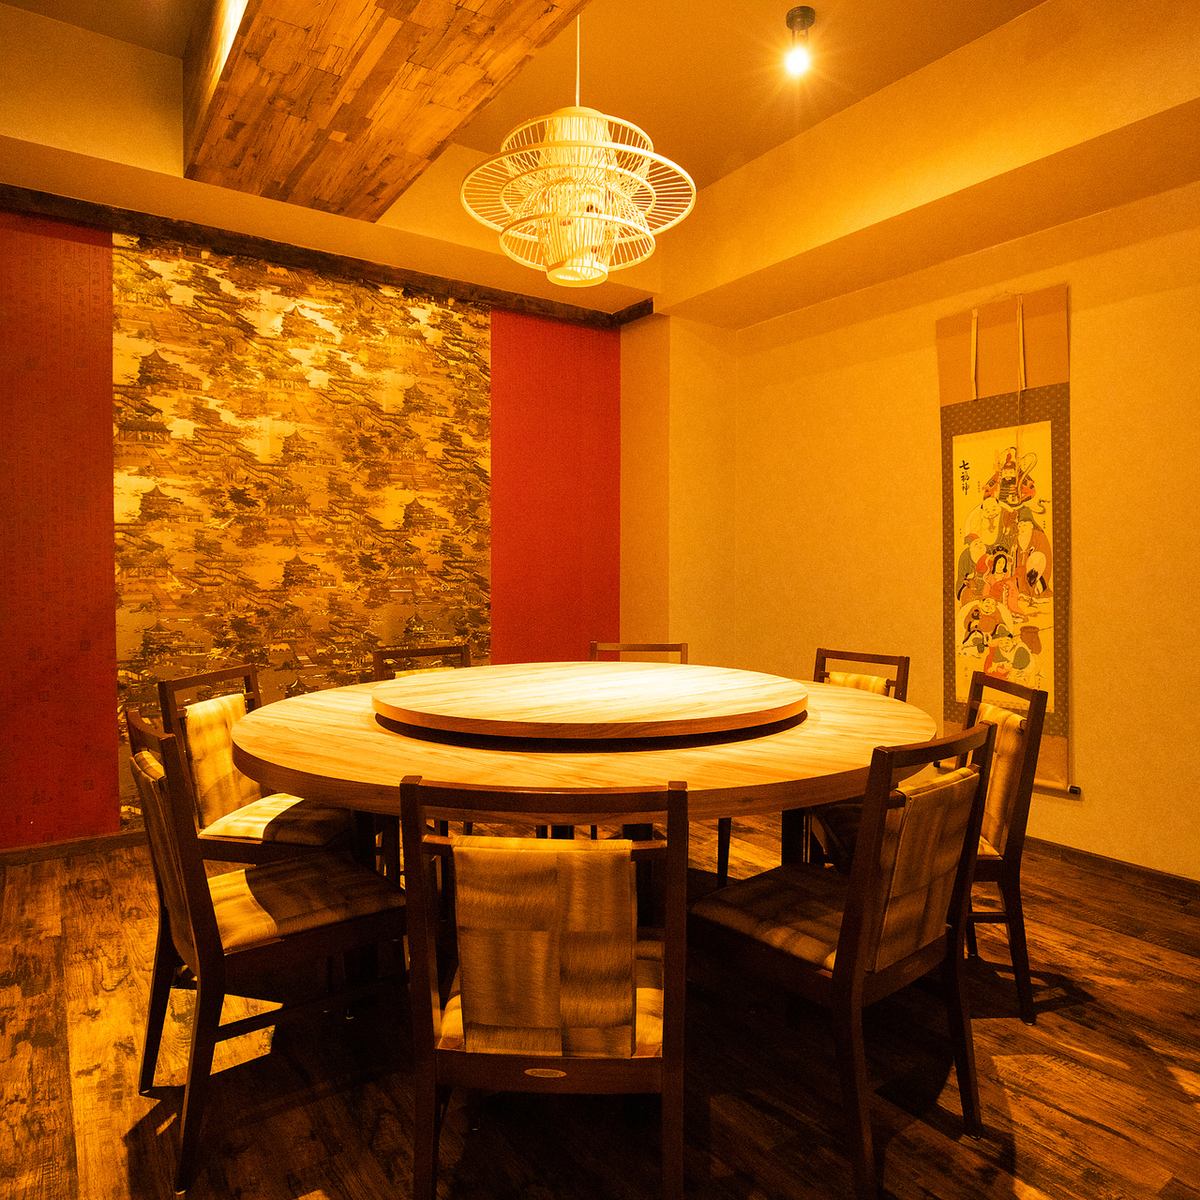 Recommended for small parties! You can enjoy a relaxing meal at a round table in a private room.